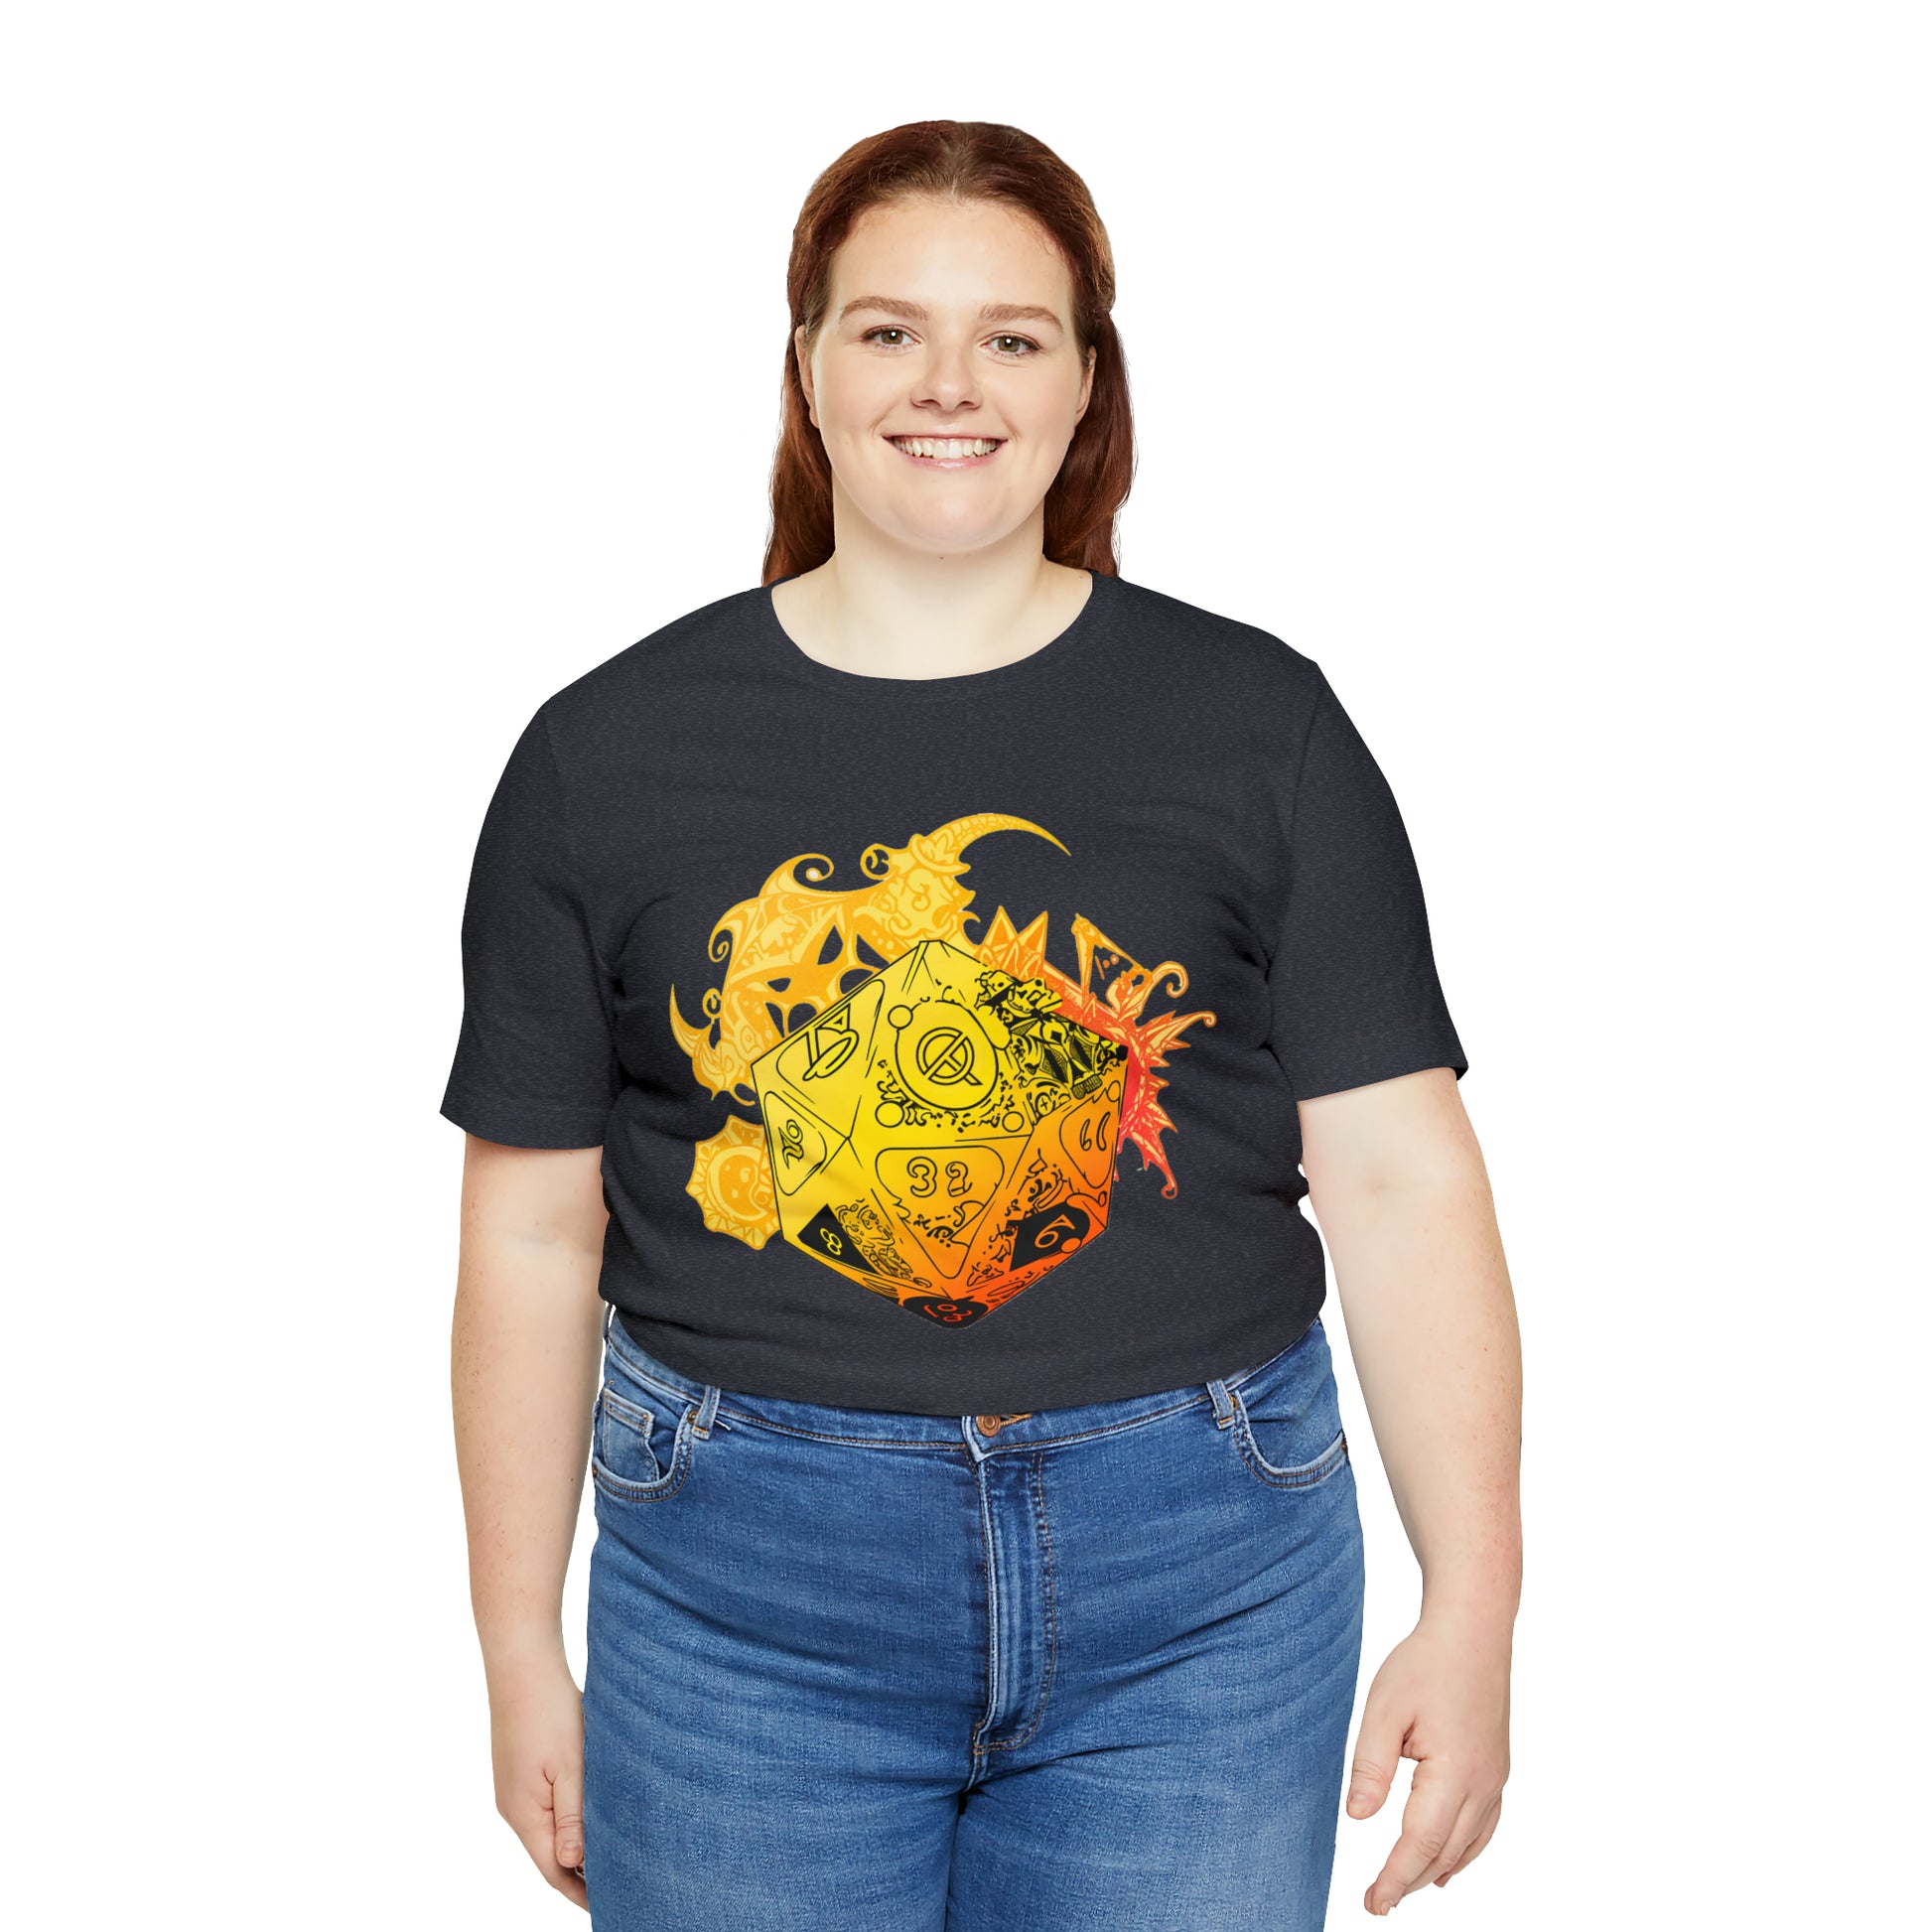 heather-navy-quest-thread-tee-shirt-with-large-yellow-dragon-dice-on-center-of-shirt